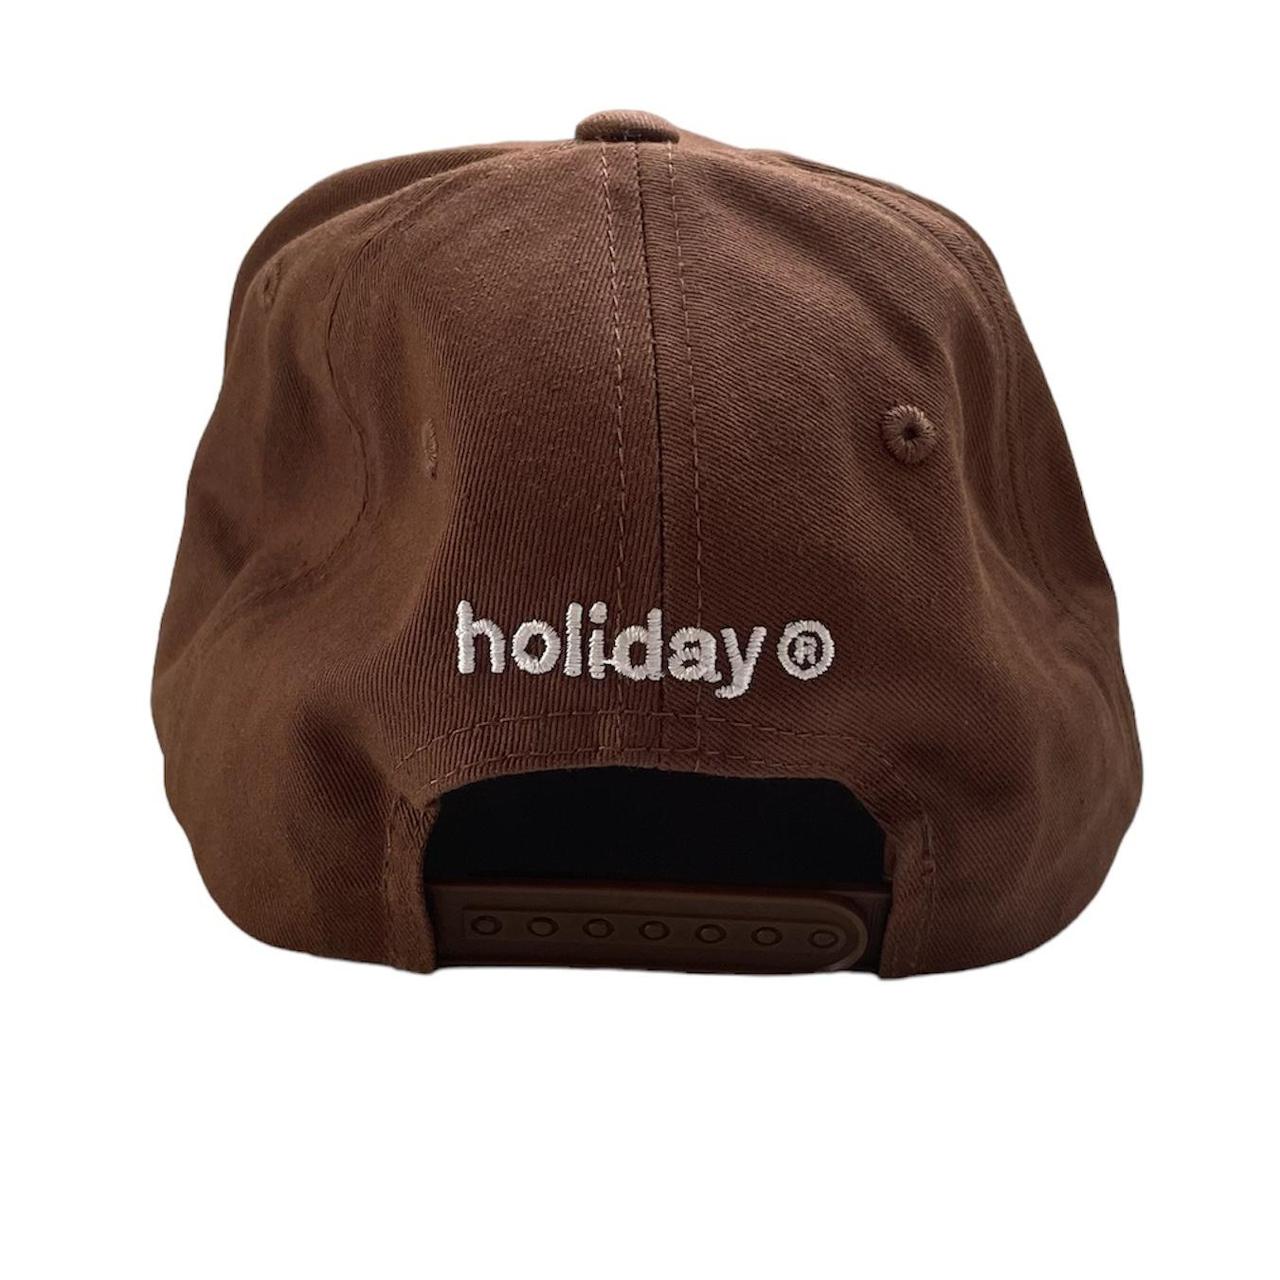 Holiday The Label Men's Brown Hat (2)